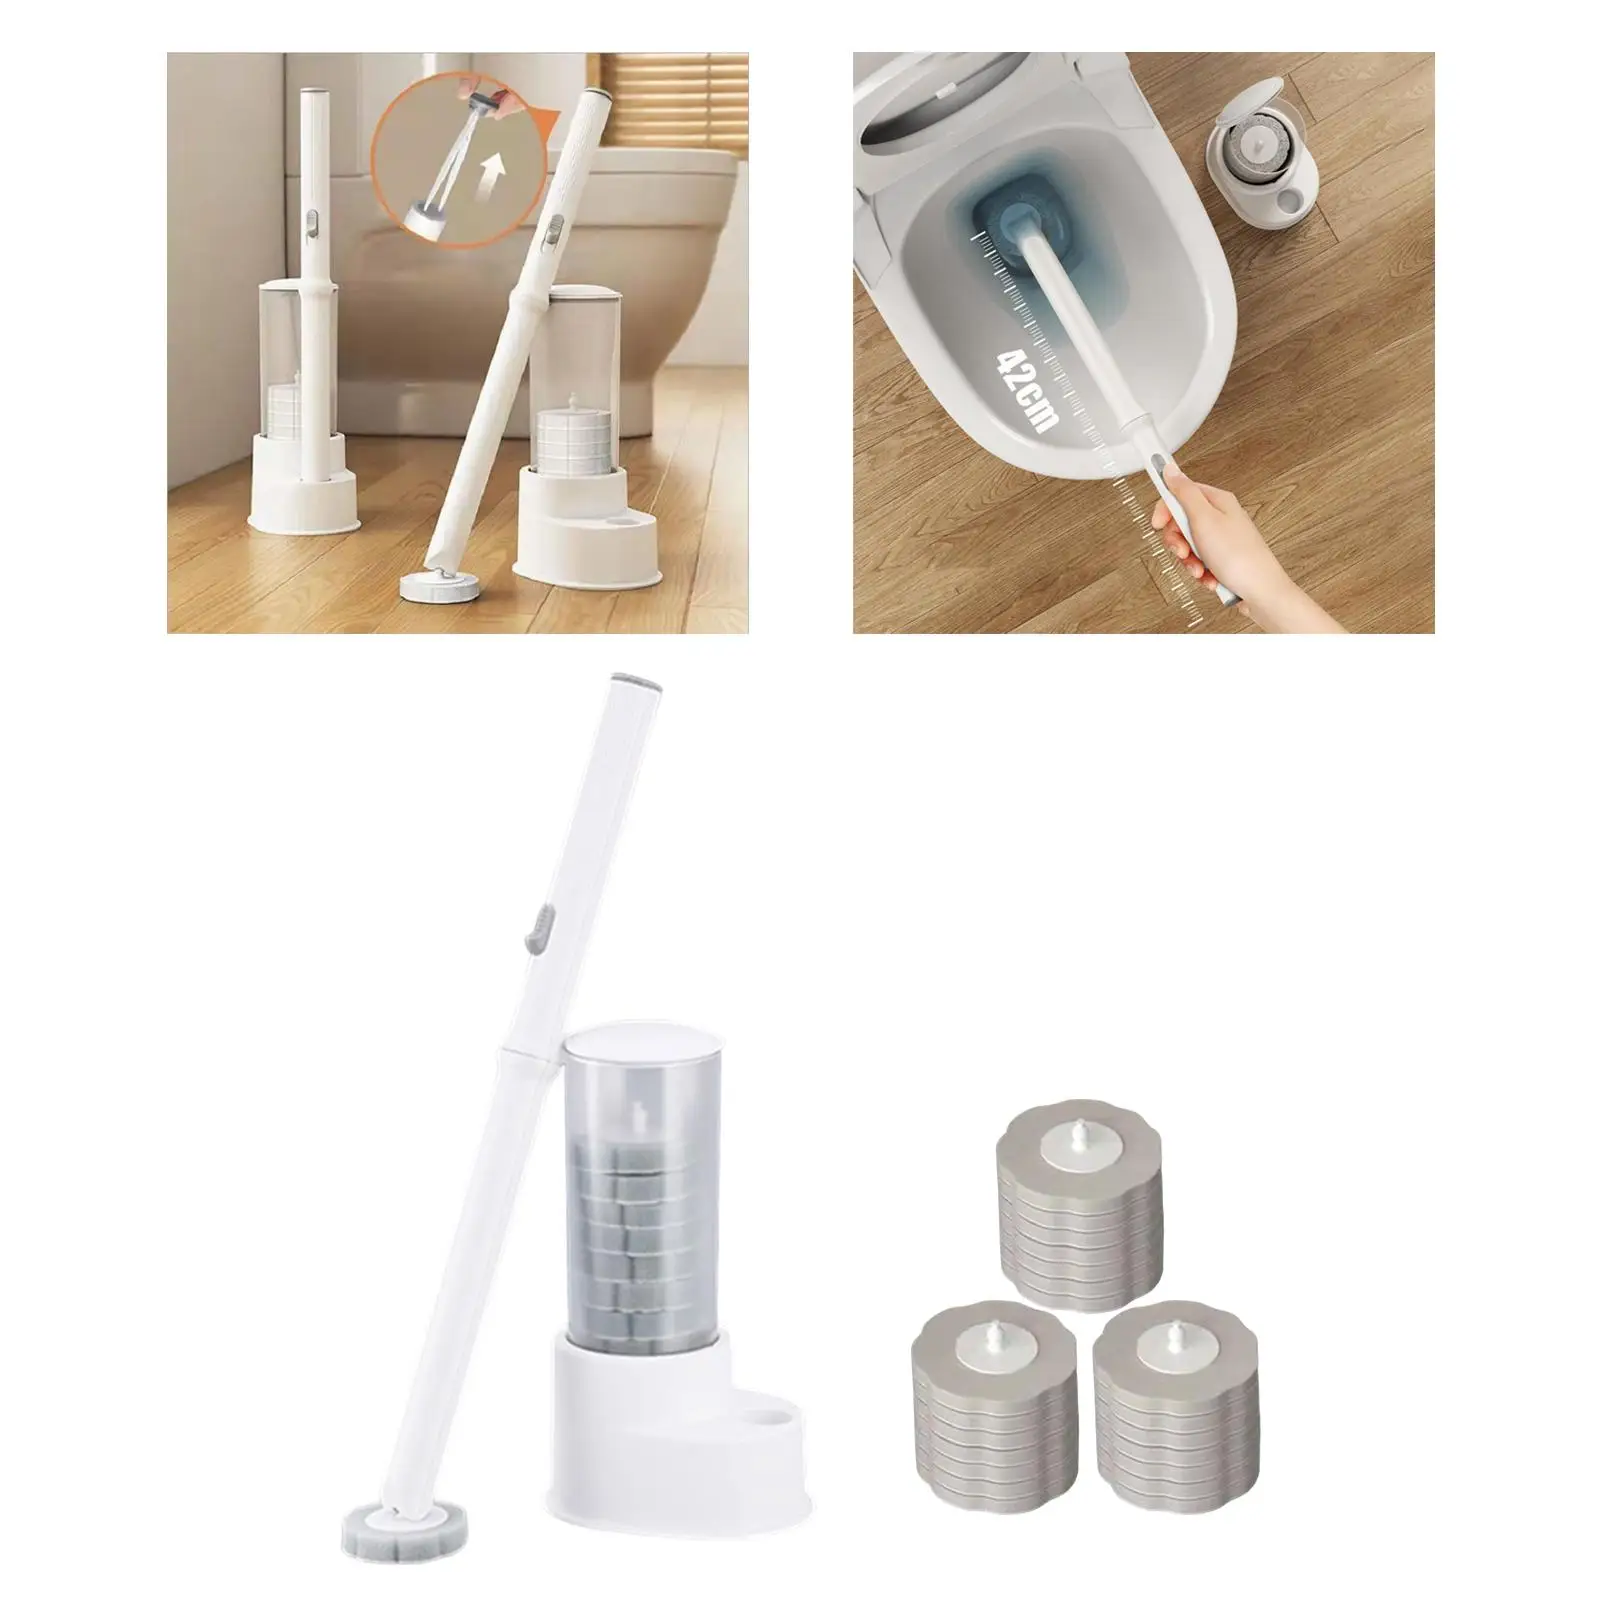 Replacable Toilet Cleaning Scrubber Set with Cleaning Liquid Cleaning Toilet Brush for Bathroom